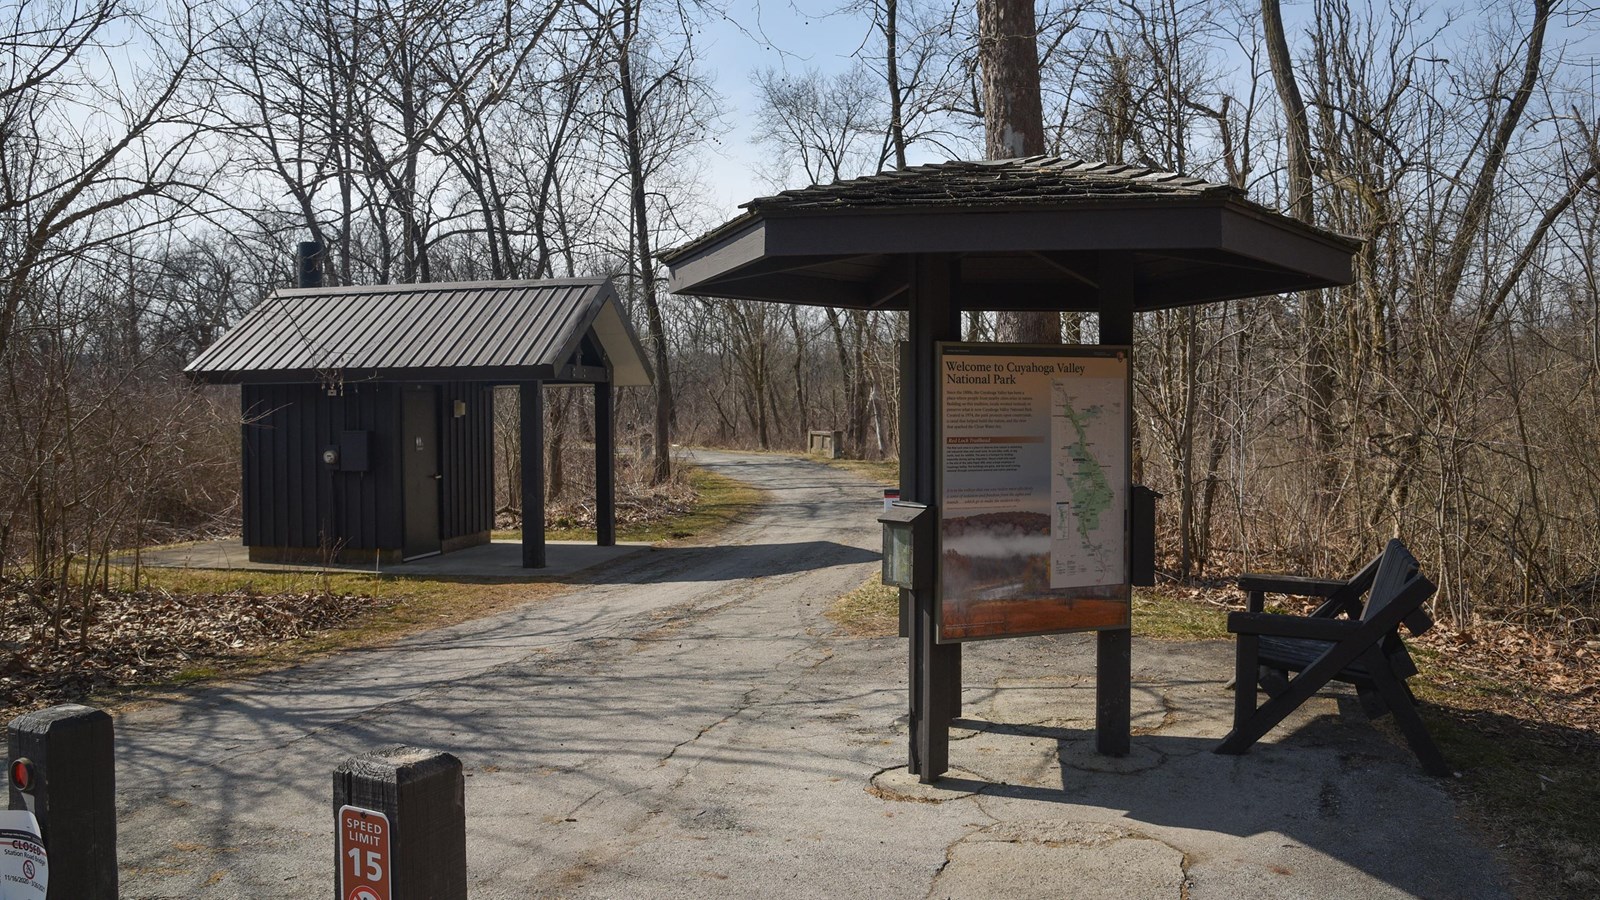 Paved trail passes a 3-sided kiosk and brown bench at right and a brown restroom structure at left.